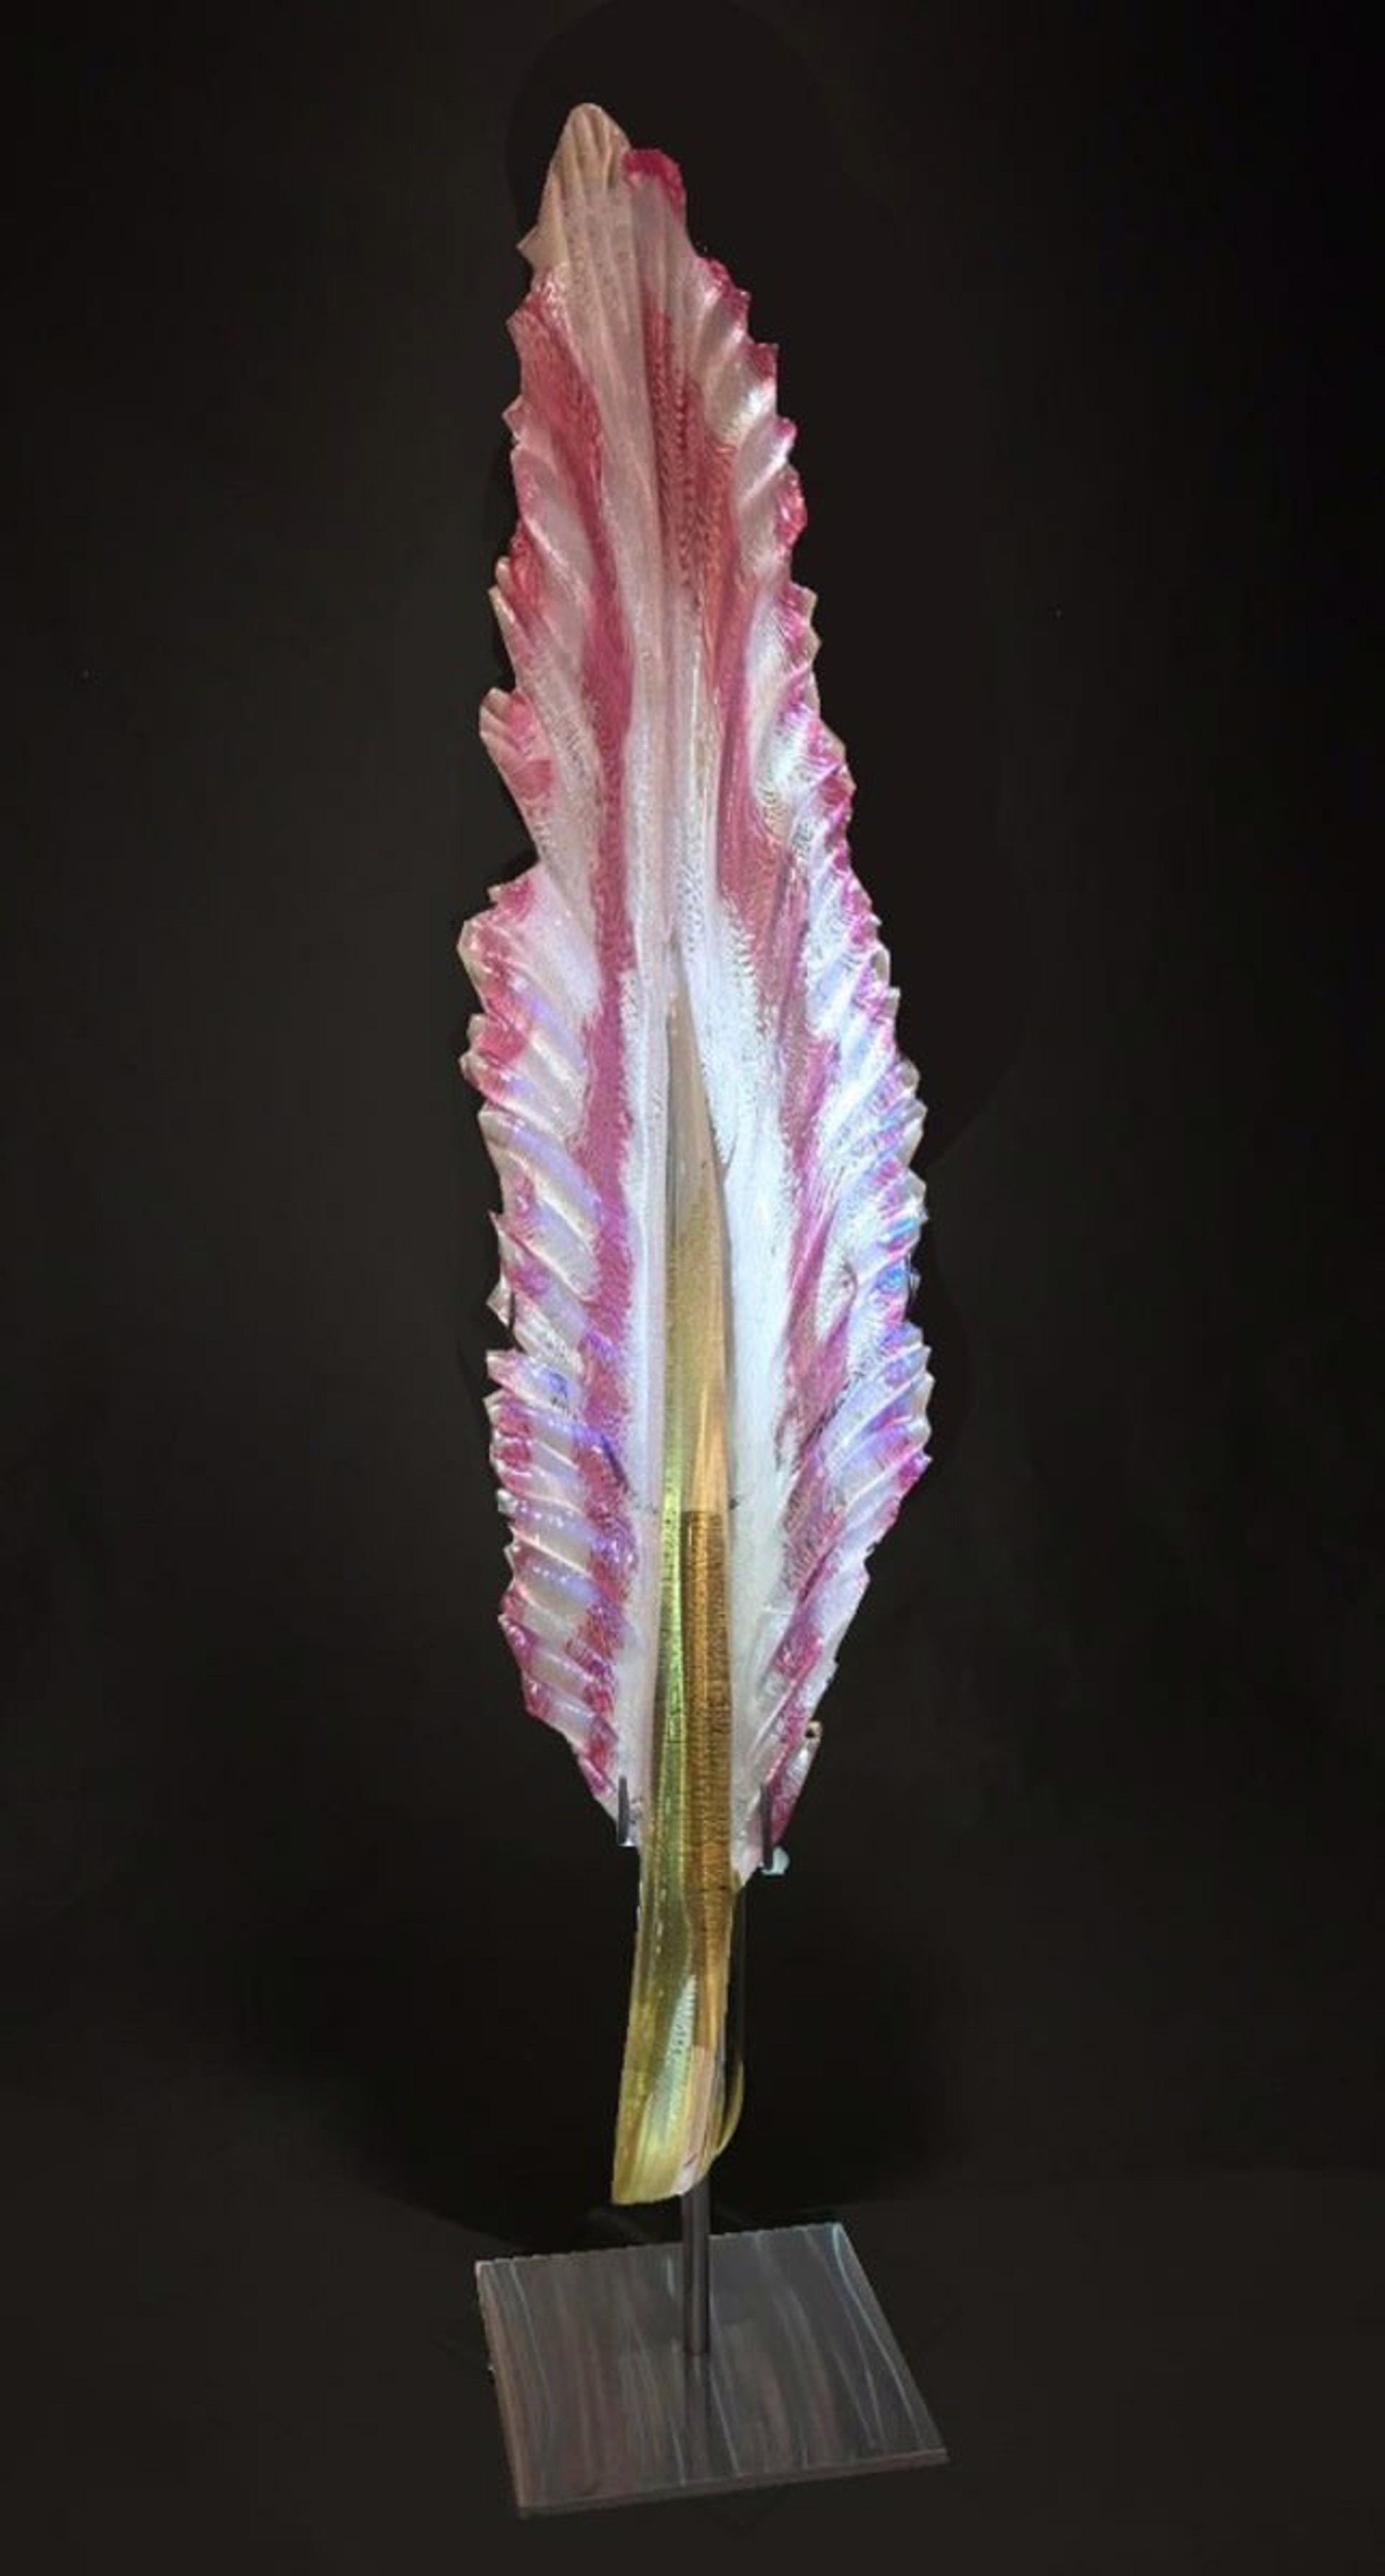 Pink & White Starling Feather by Nic McGuire